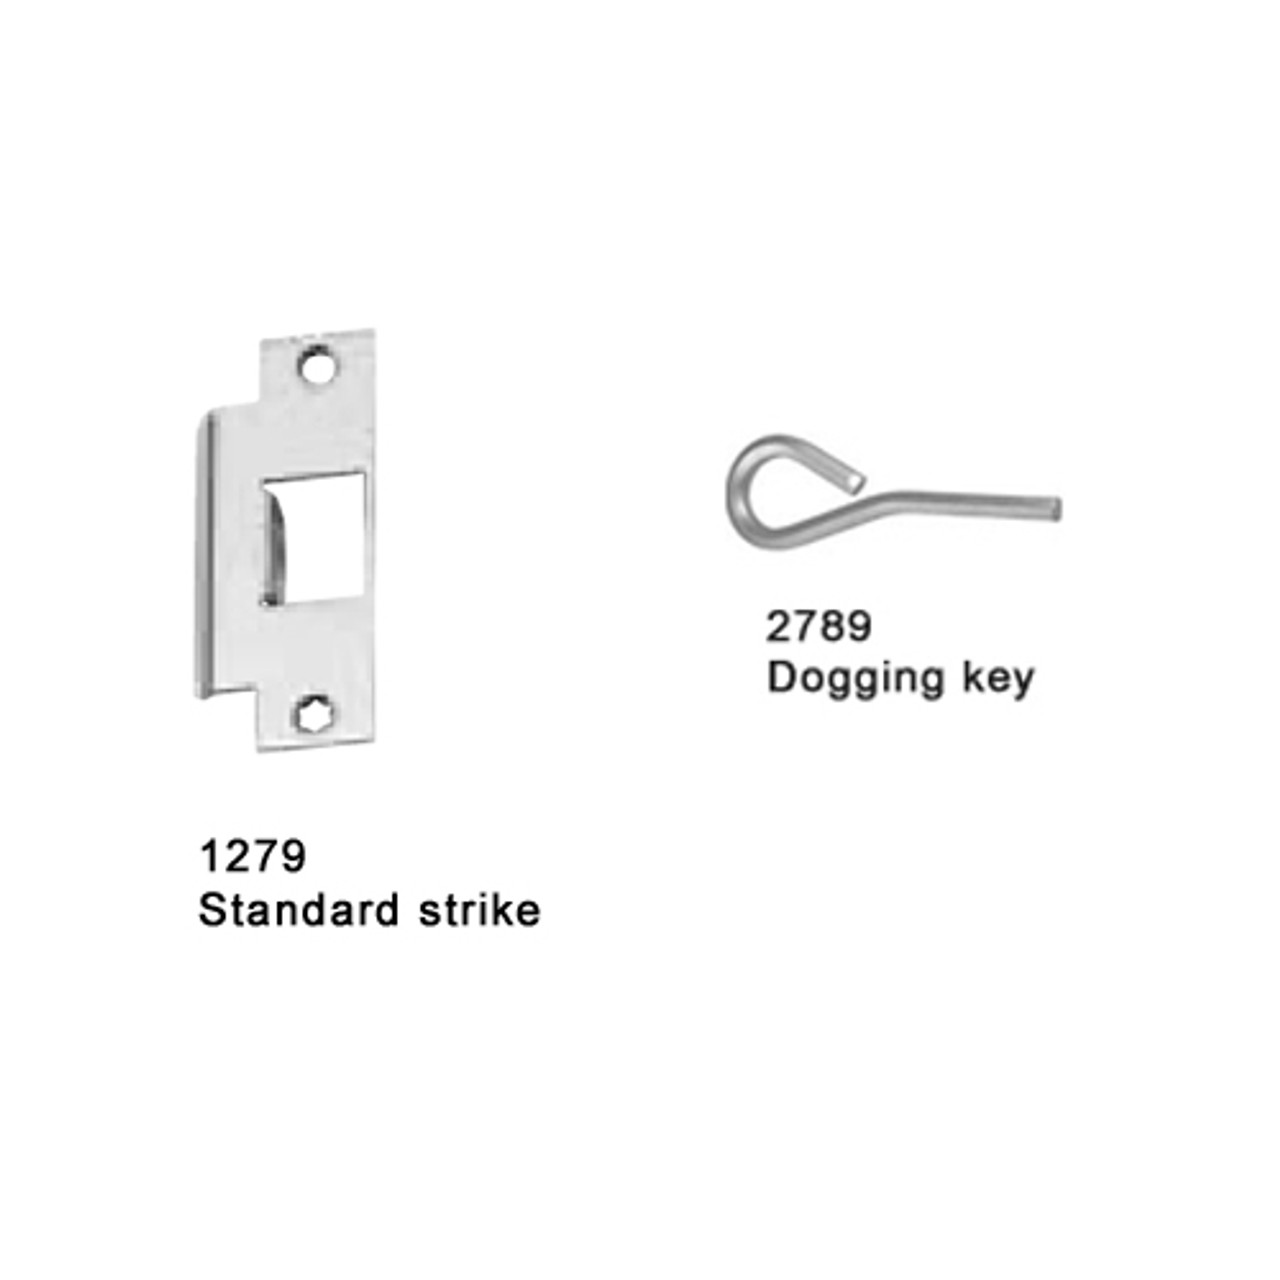 25-M-DT-US28-3-RHR Falcon 25 Series Mortise Lock Devices with 512DT Dummy Trim in Anodized Aluminum